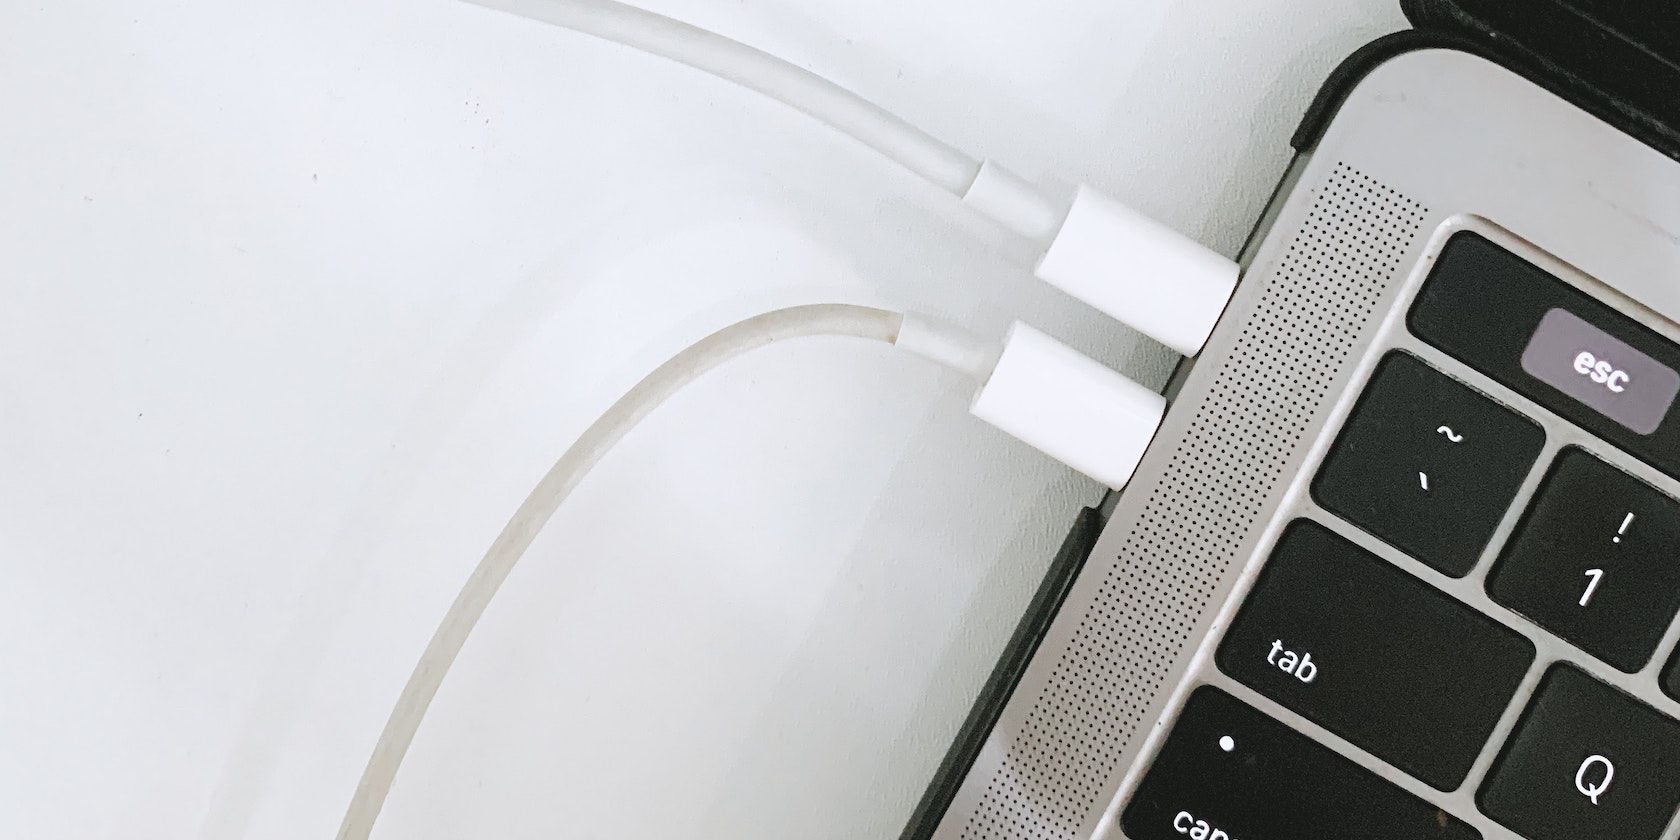 An Apple laptop with 2 USB-C cables plugged into its ports